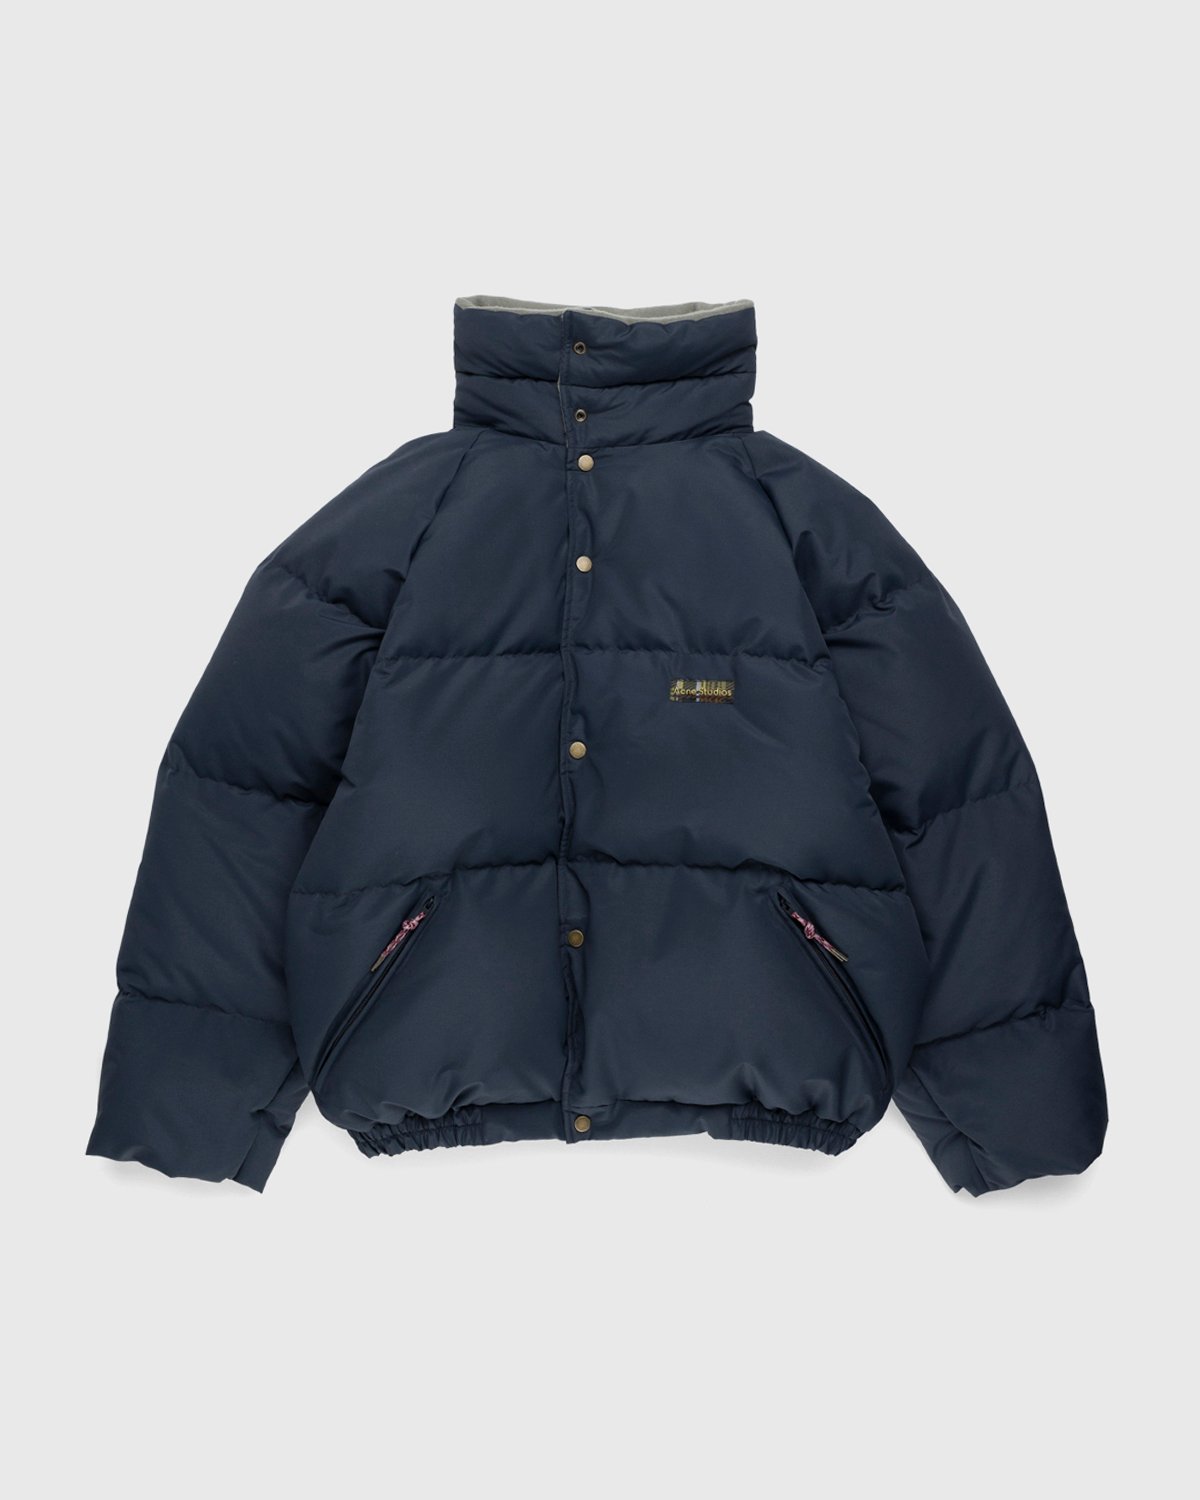 Acne Studios - Down Puffer Jacket Charcoal Grey - Clothing - Grey - Image 1